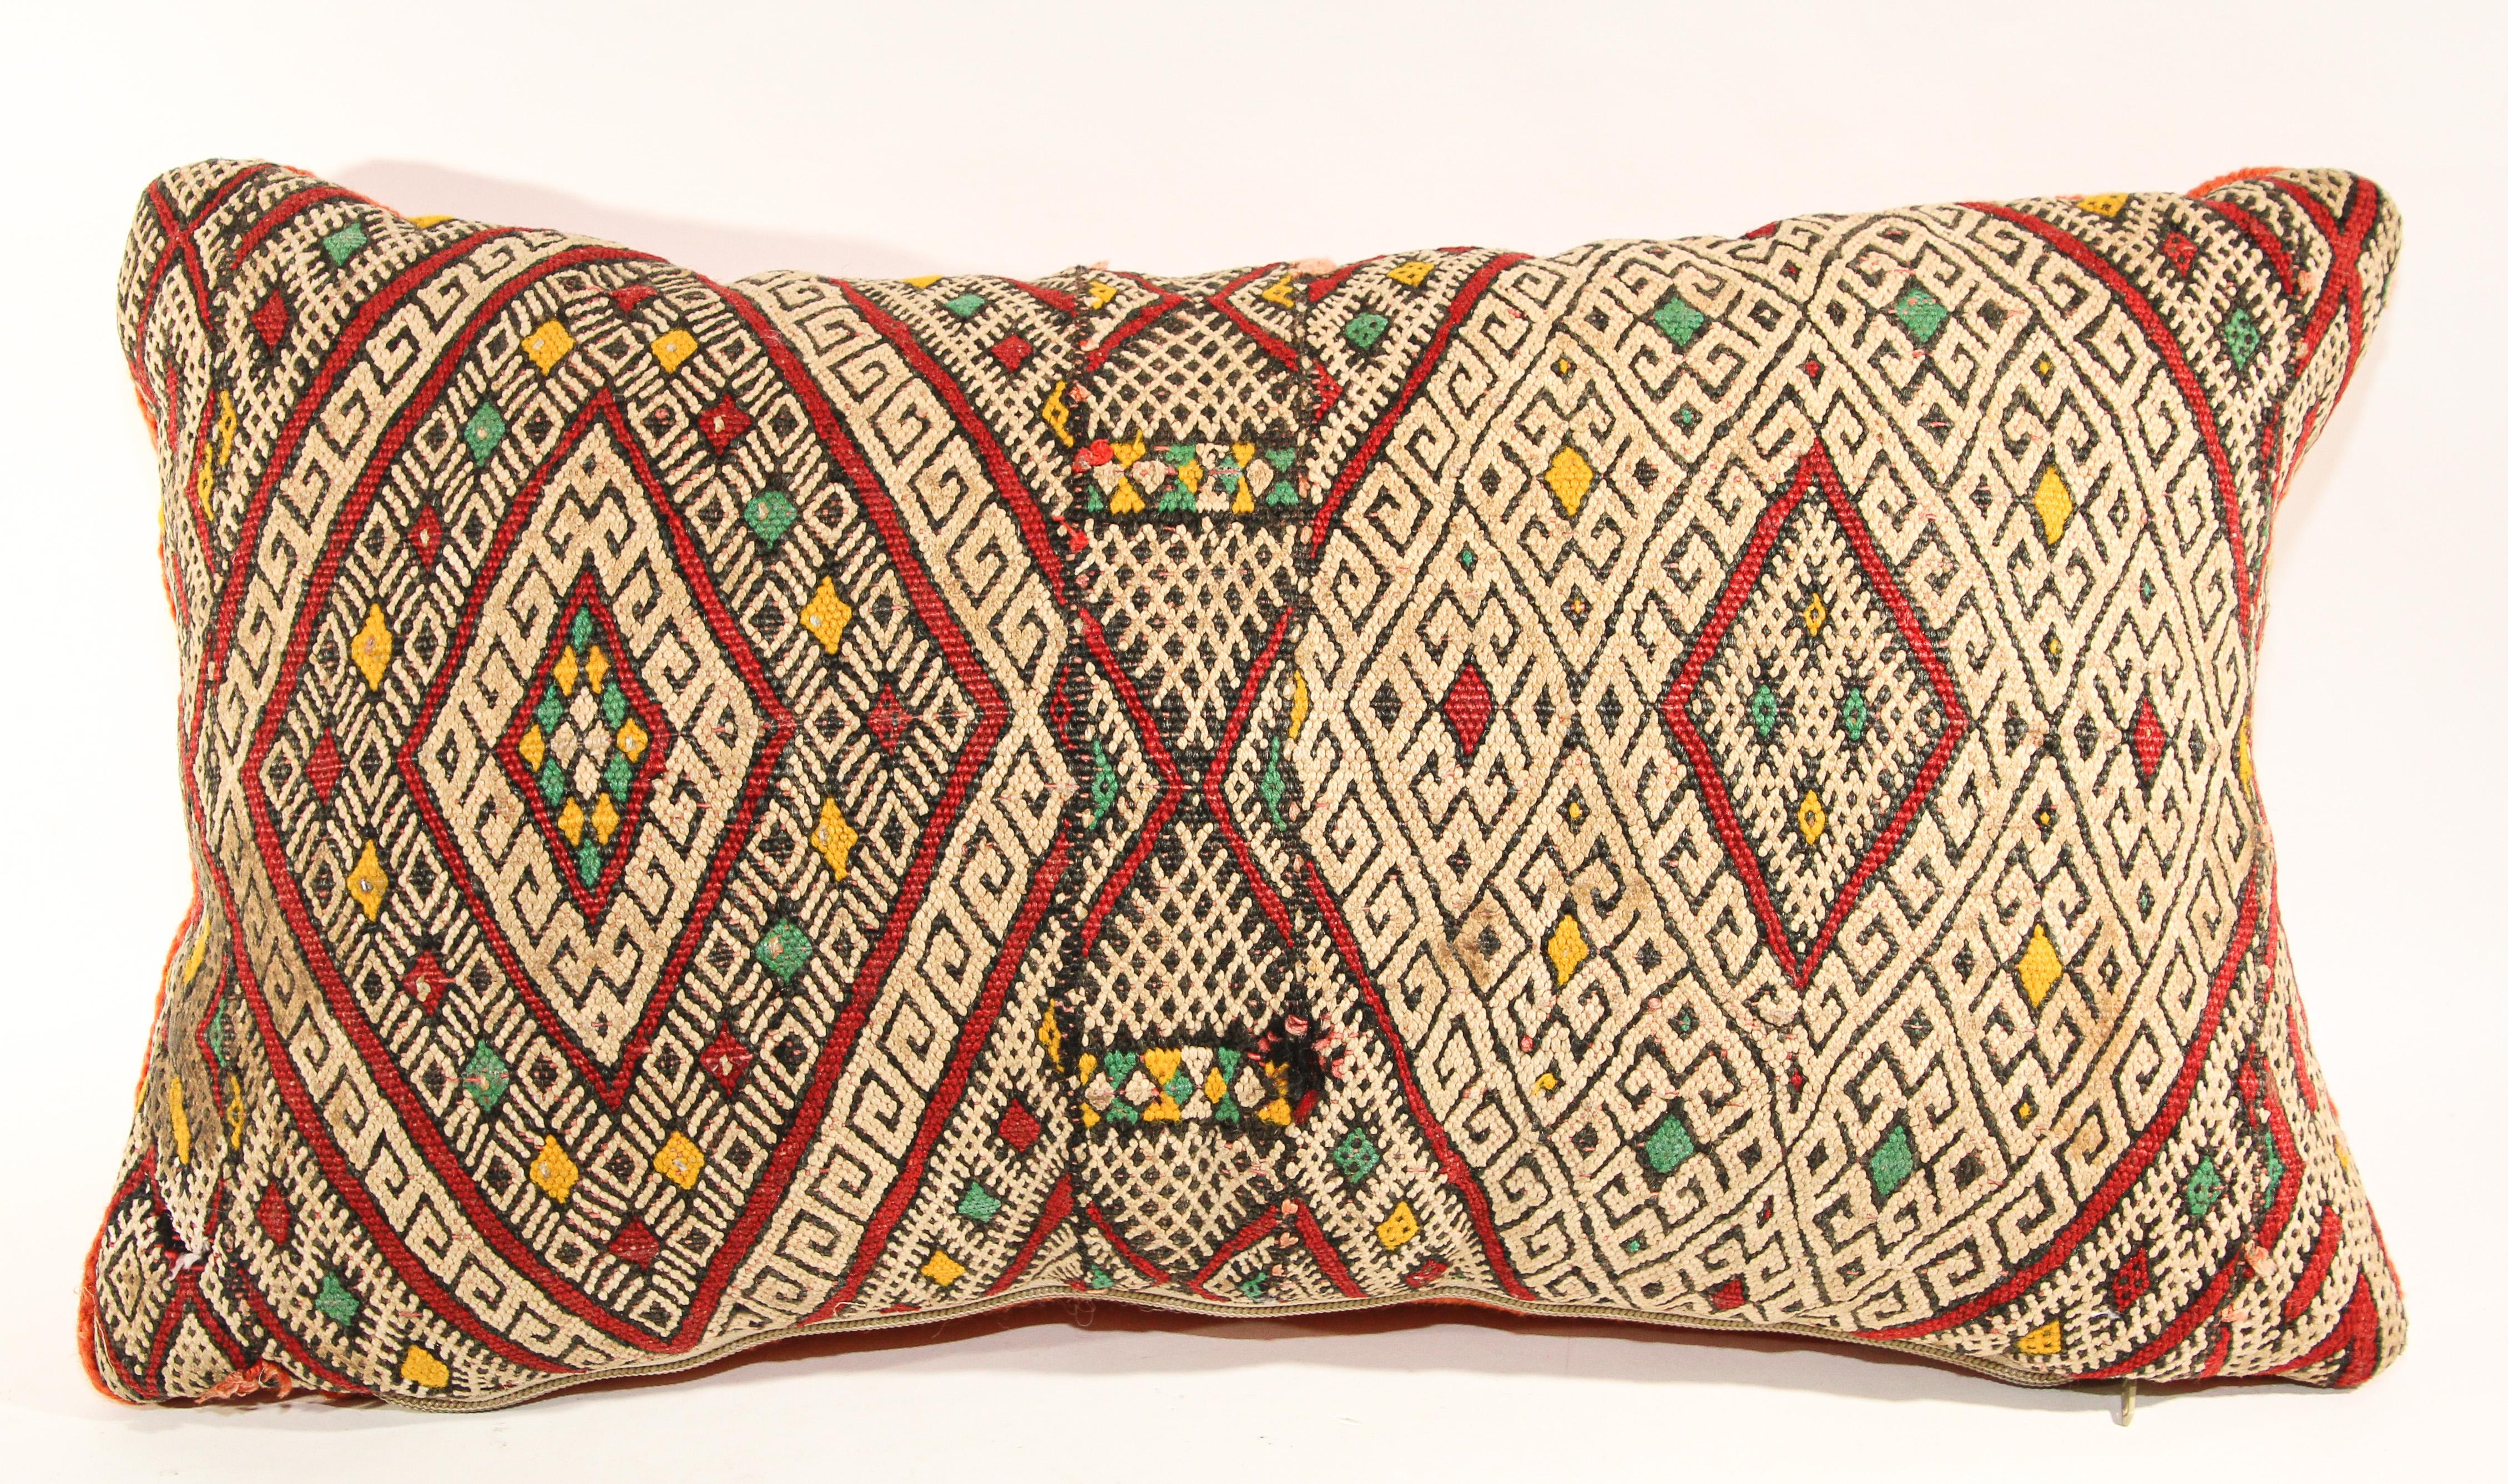 Moroccan authentic Berber ethnic handwoven tribal throw pillow made from a vintage rug.The front and the back are made from a different rug, front is more elaborate and back is more plain.Geometric North African tribal designs in red, white and